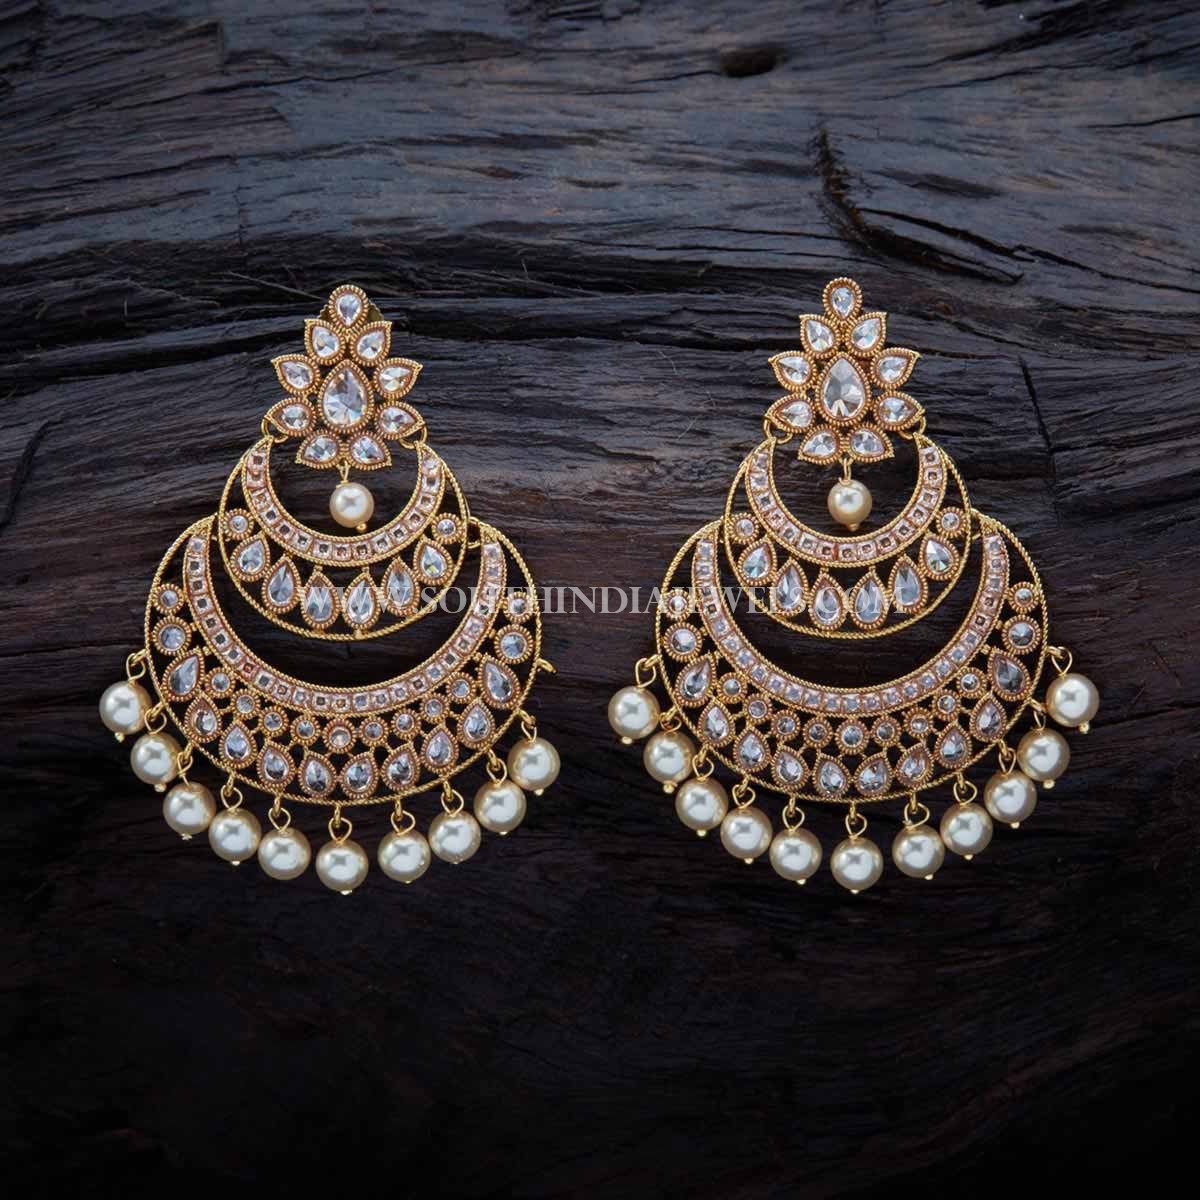 Gold Plated Antique Chandbali Earrings - South India Jewels